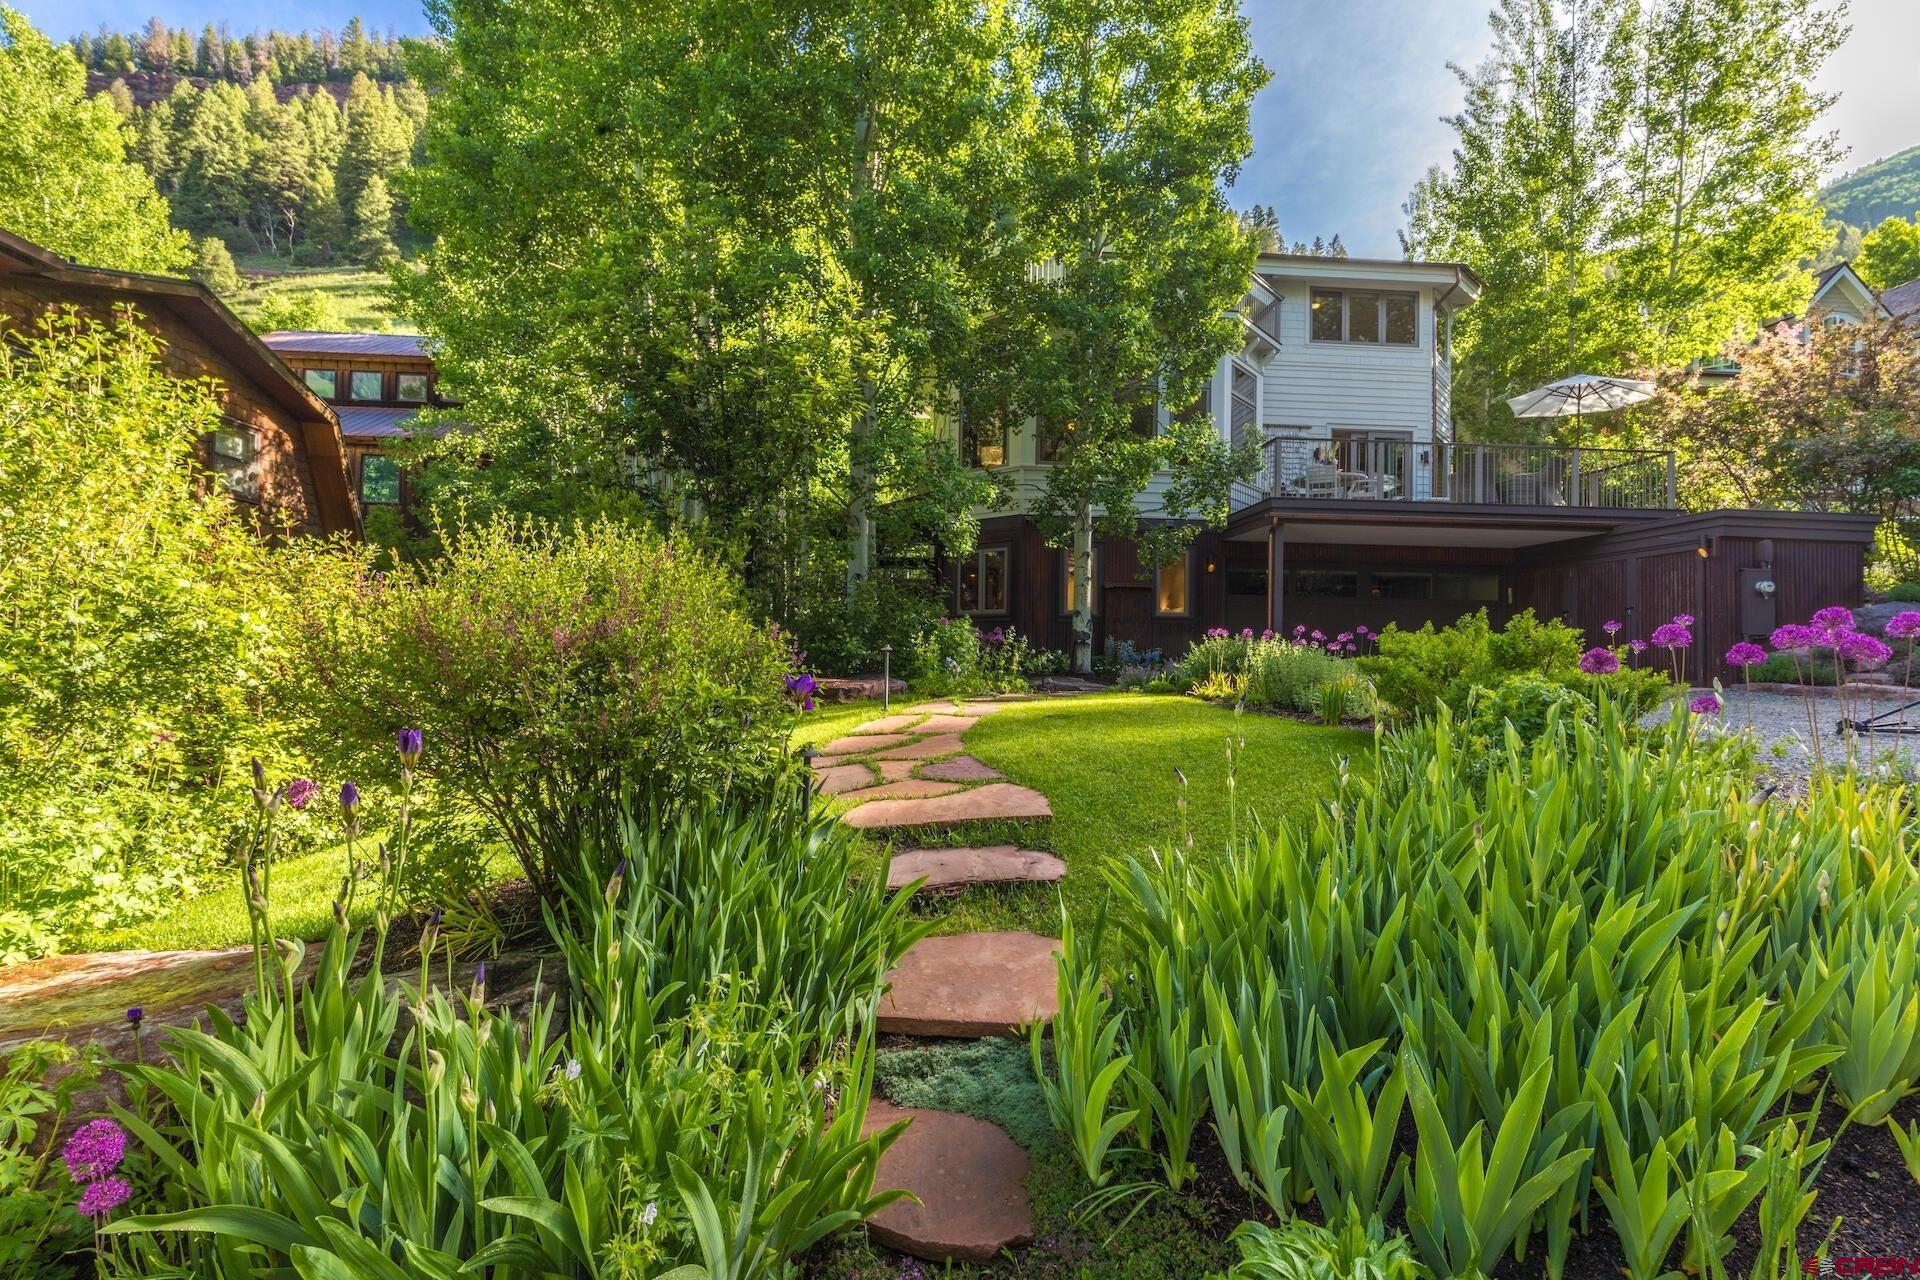 Immerse in the tranquility of this hard-to-find secluded home, nestled beyond a 1-lane bridge on an oversized lot. Steps away is the only creek running through town, its gentle sound a constant reminder of the sanctuary that awaits you. Relax in a lush, cascading flower garden surrounded by towering aspen trees providing a sense of privacy & seclusion. A roomy, gated backyard is perfect for pets, dinner parties, or a game of croquet. Inside is just as inviting. Explore creativity in the flex room & study. The meditation deck, with its commanding views of snow-capped mountains, beckons to soak up the peace & quiet surrounding you. A supersized 3+ car garage has lots of storage. Whether looking for solitude or shared adventures, experience the good life in this hidden mountain oasis.